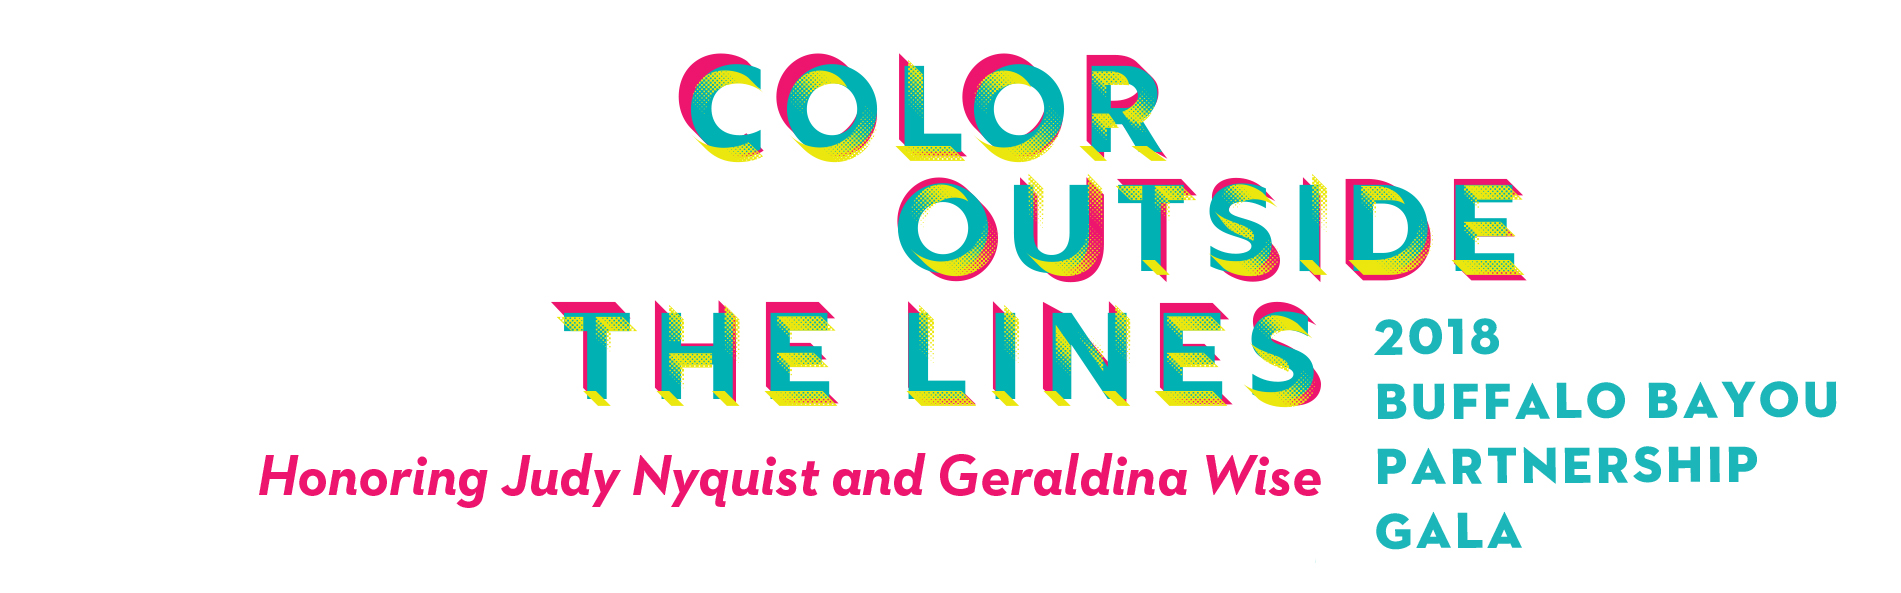 Image BBP Gala: Color Outside the Lines